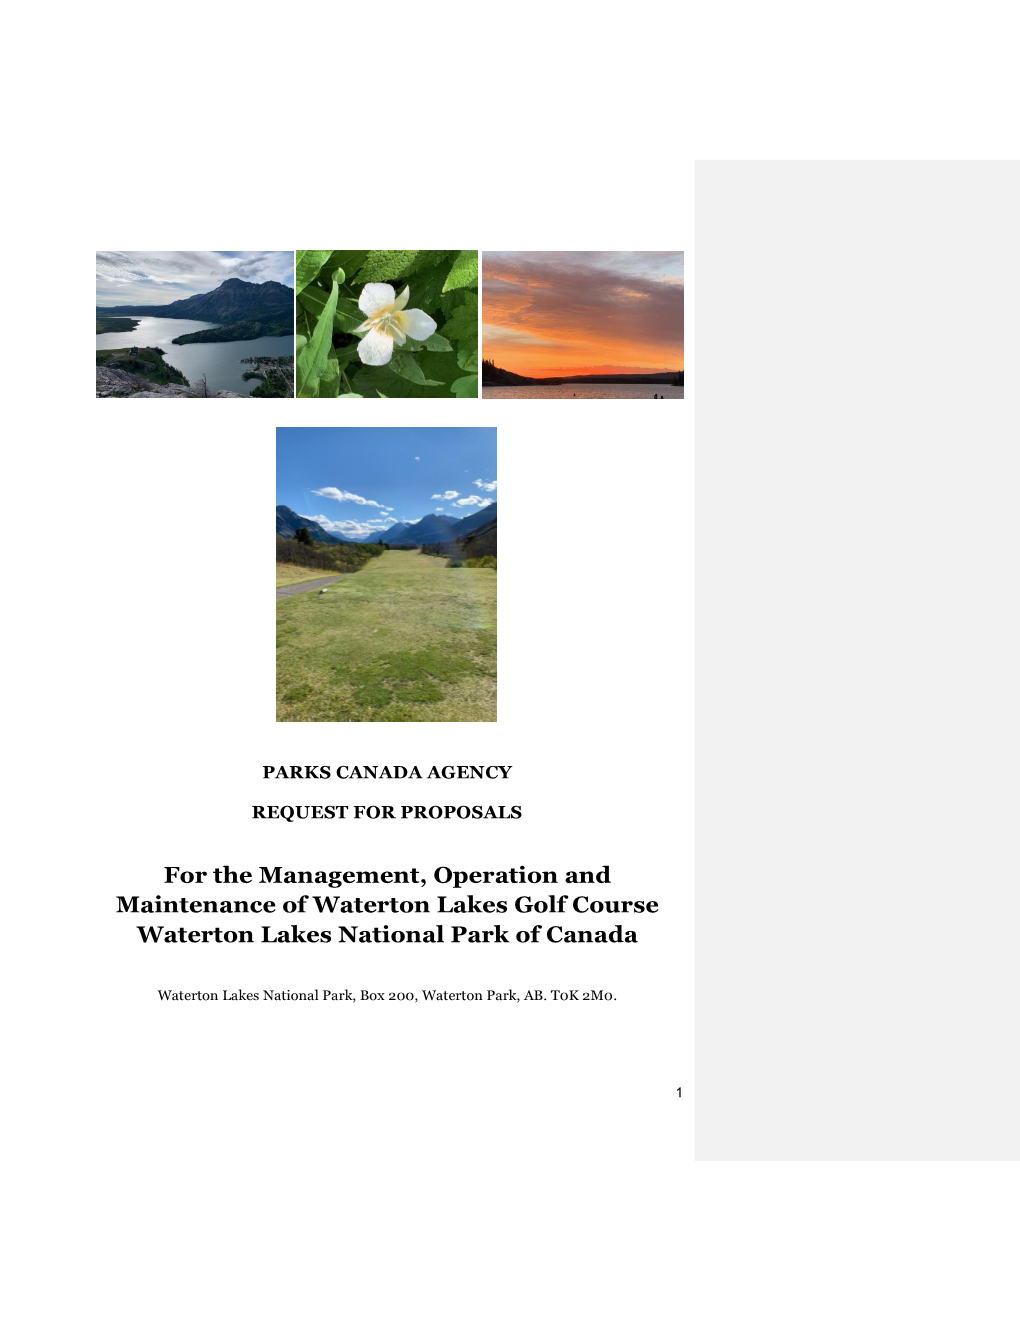 For the Management, Operation and Maintenance of Waterton Lakes Golf Course Waterton Lakes National Park of Canada